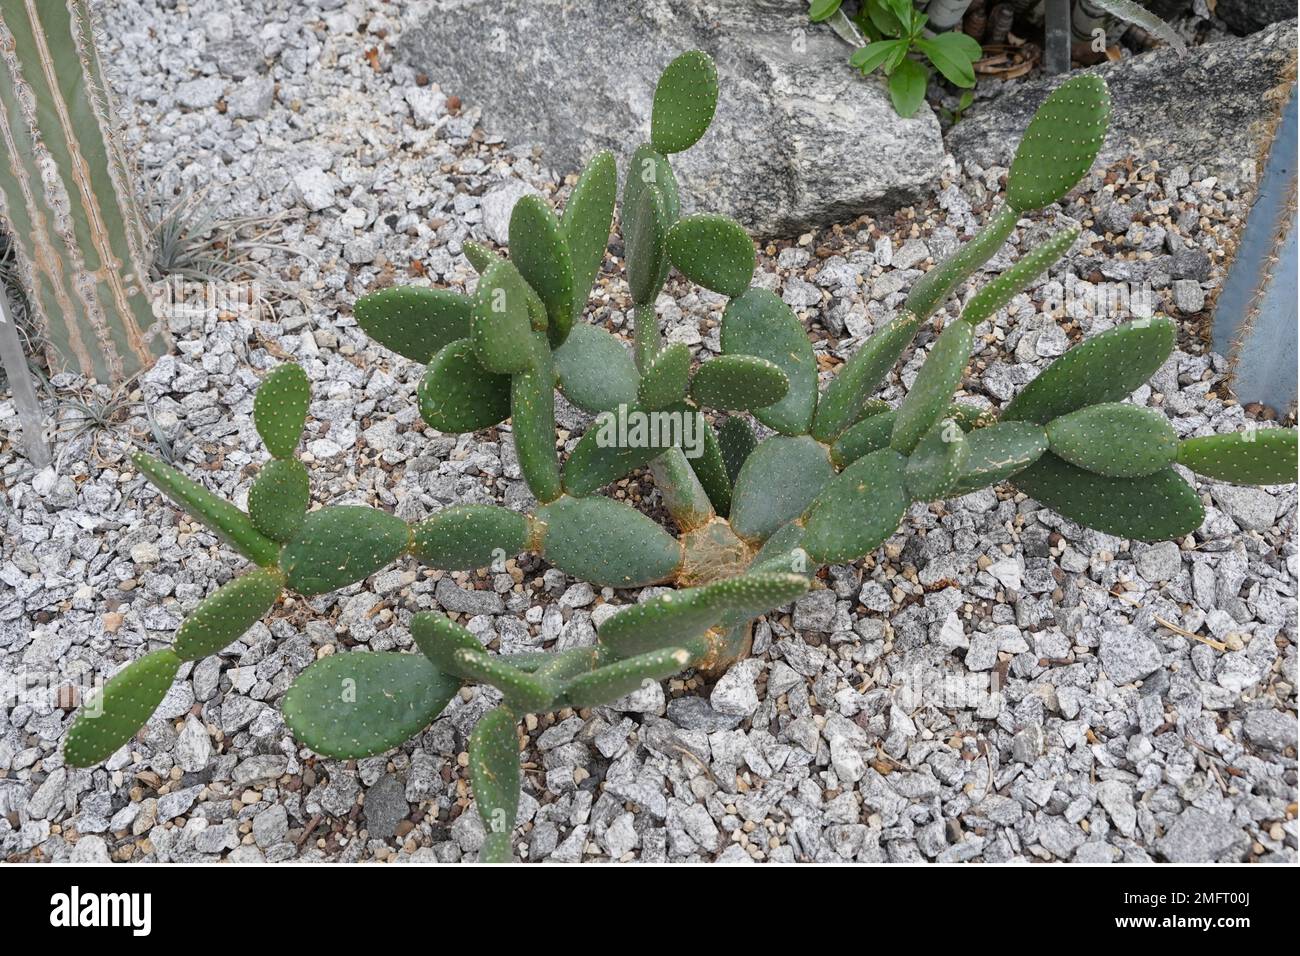 Cactus called in Latin Tacinga inamoena is a species of plant in the family Cactaceae. It is endemic to Brazil. Stock Photo